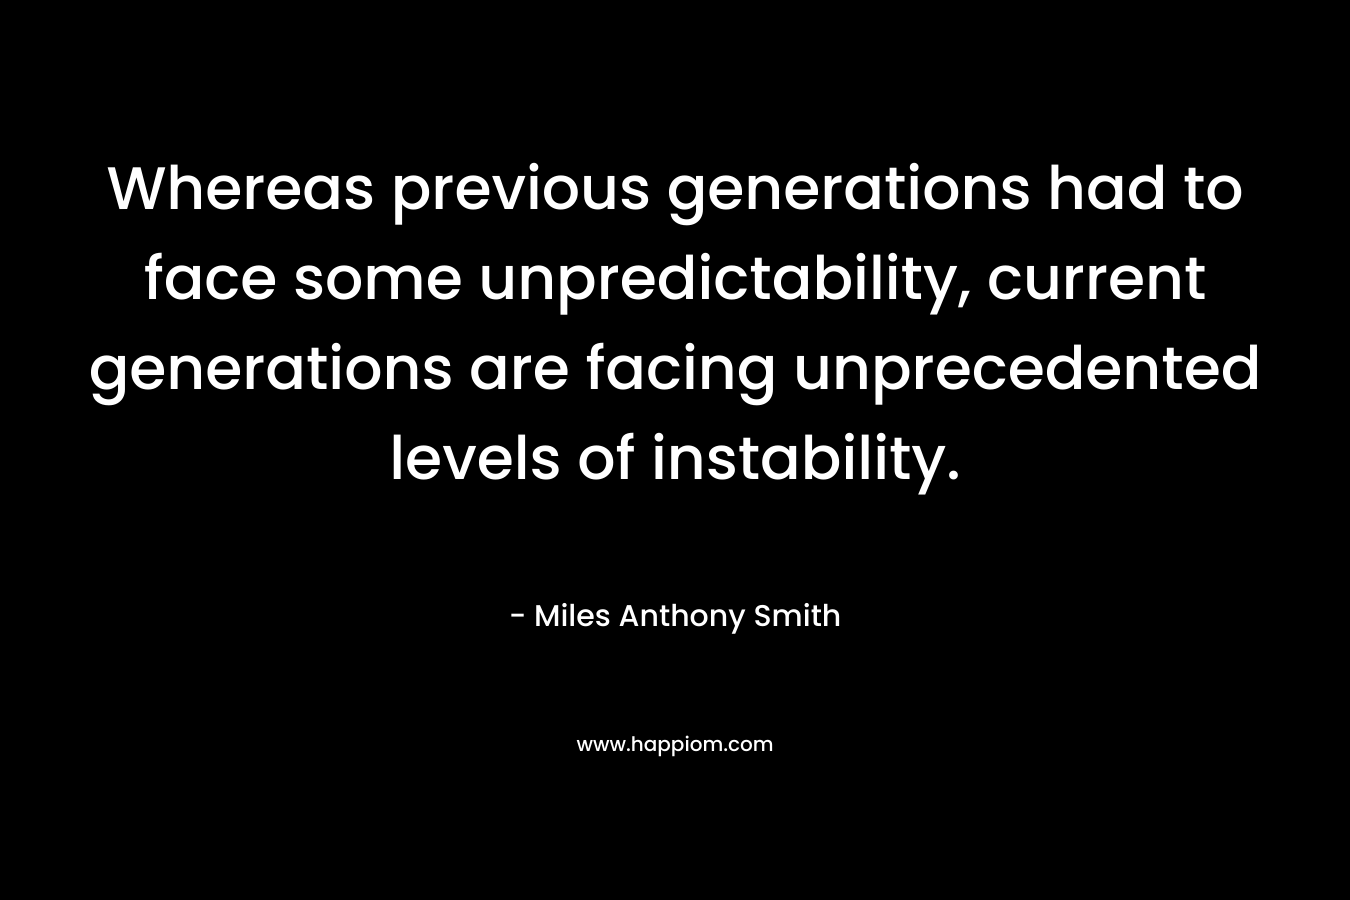 Whereas previous generations had to face some unpredictability, current generations are facing unprecedented levels of instability. – Miles Anthony Smith